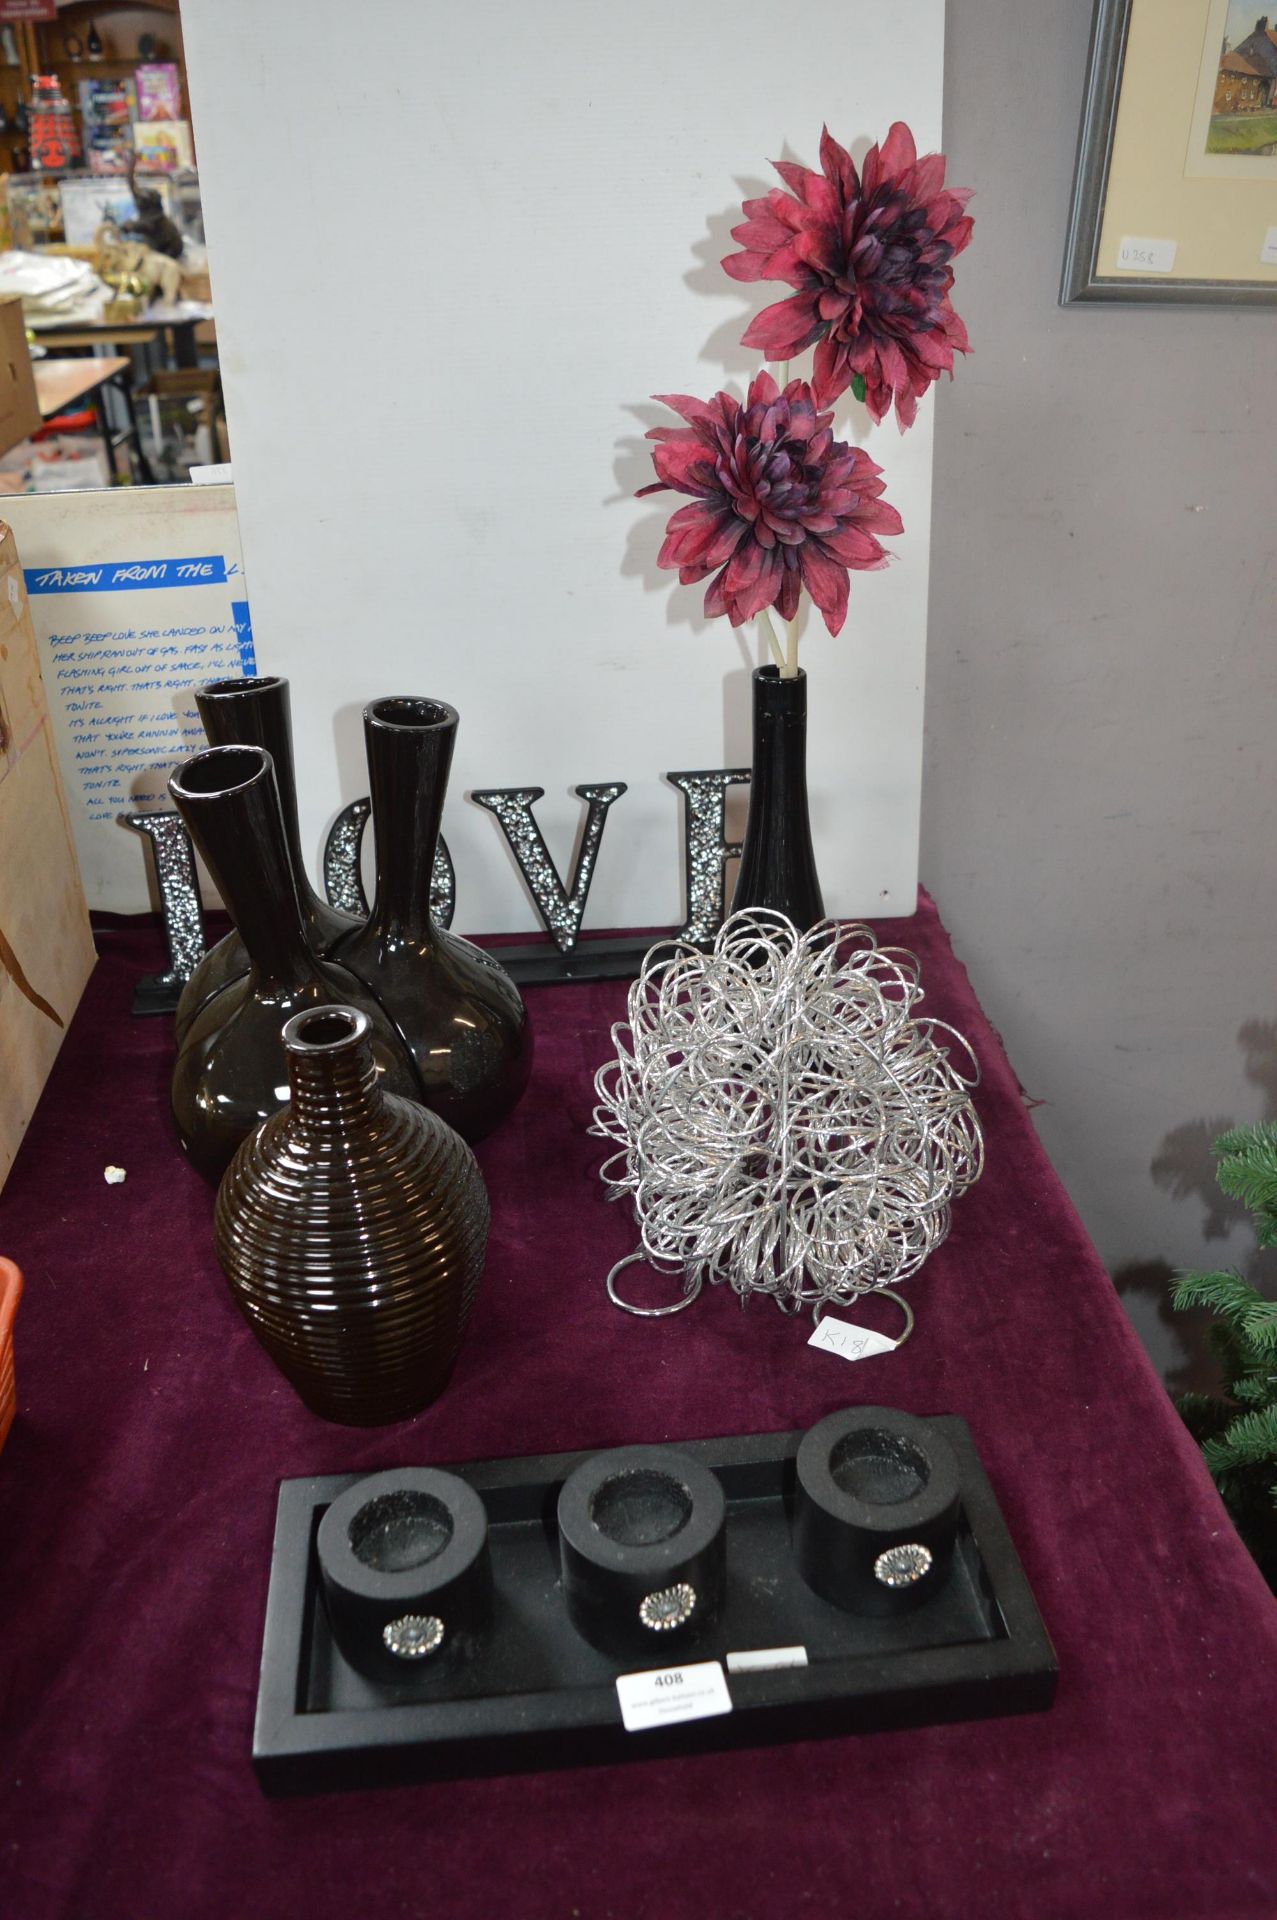 Black Vases, Candle Holders, and a Love Sign